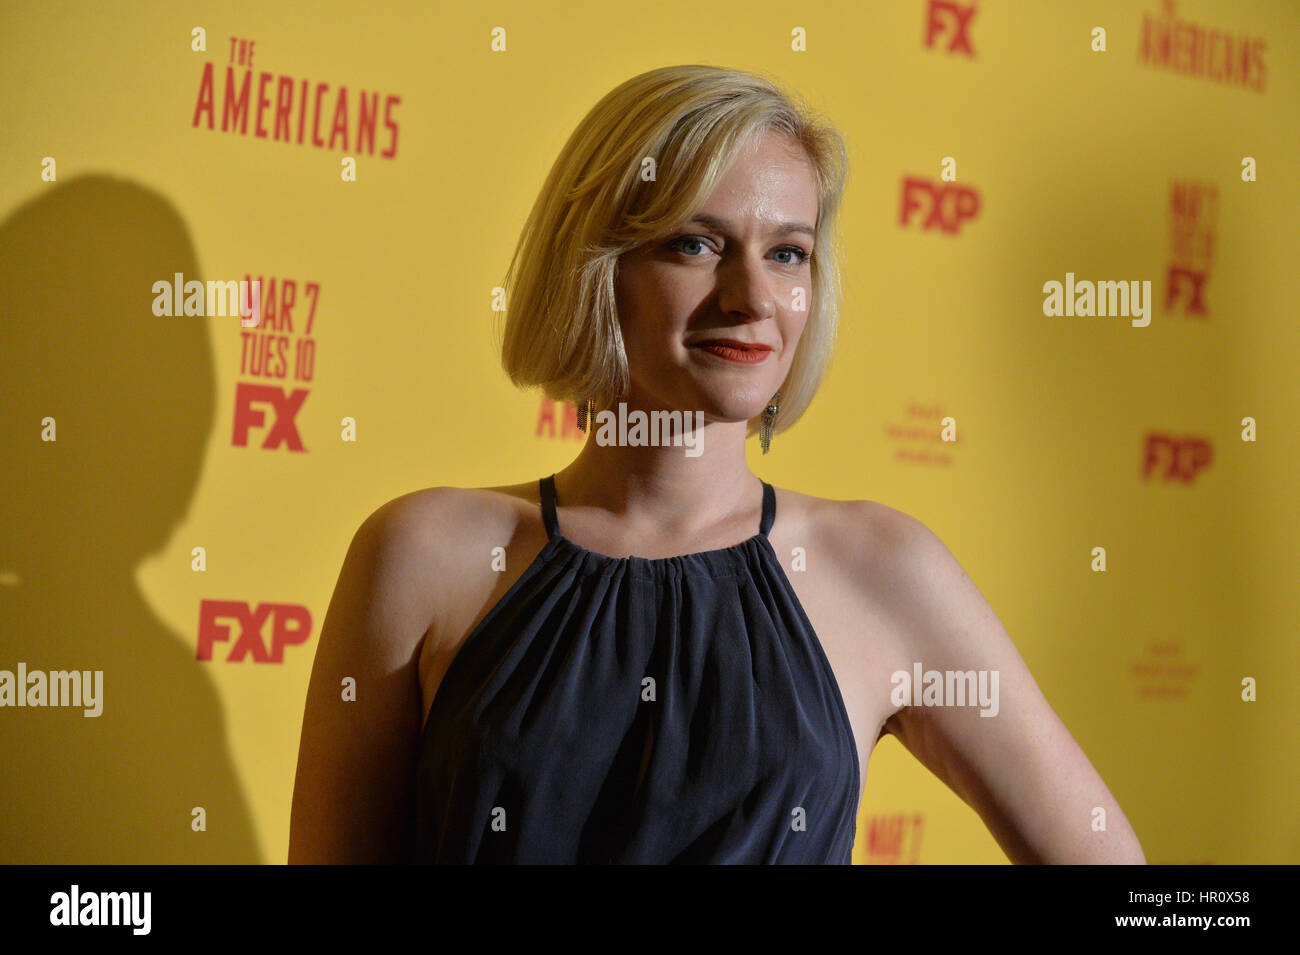 New York, USA. 25th February 2017. Suzy Jane Hunt attends 'The Americans' Season 5 Premiere at DGA Theater on February 25, 2017 in New York City. Erik Pendzich/Alamy Live News Stock Photo